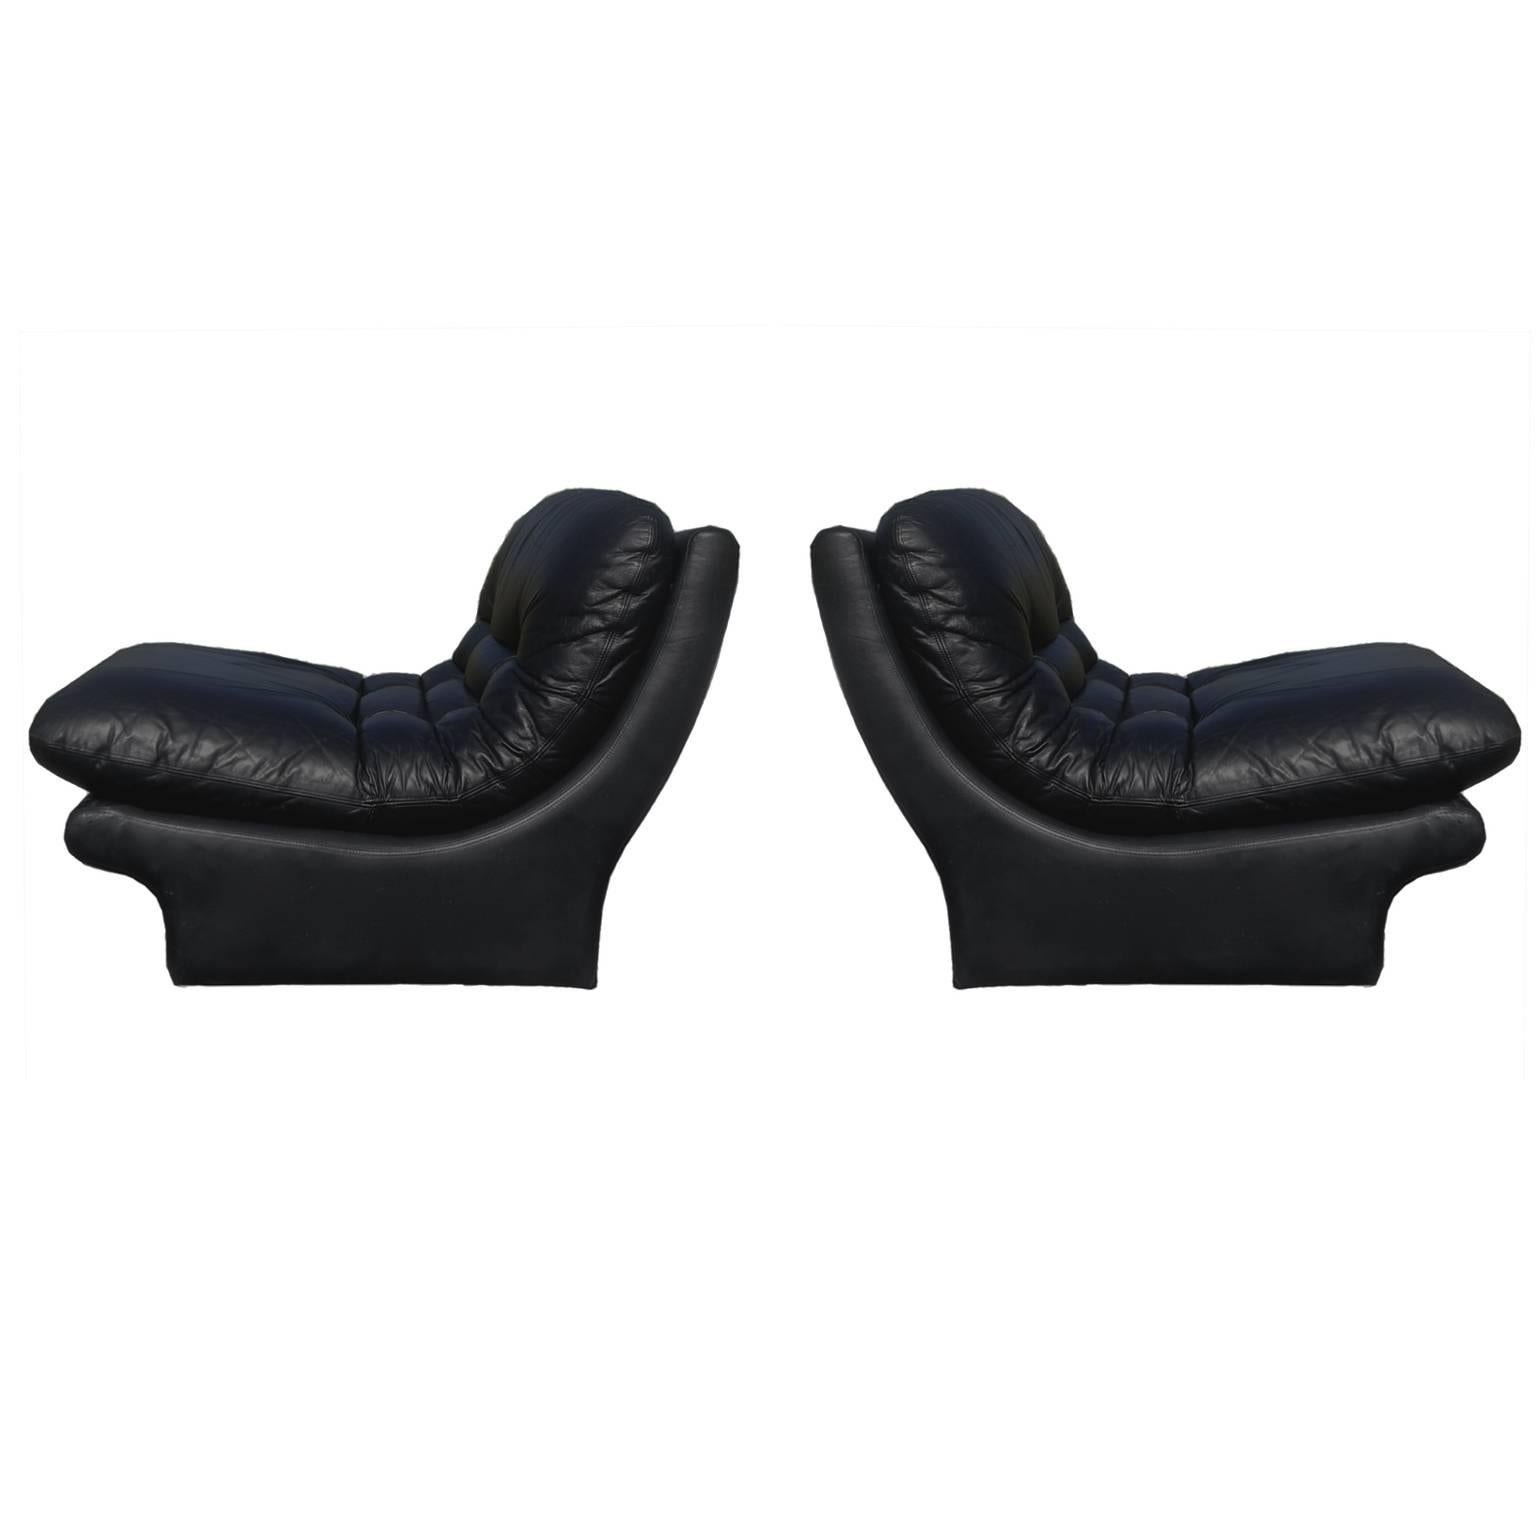 Two Pair of Black Leather Vladimir Kagan Style Lounge Slipper Chairs